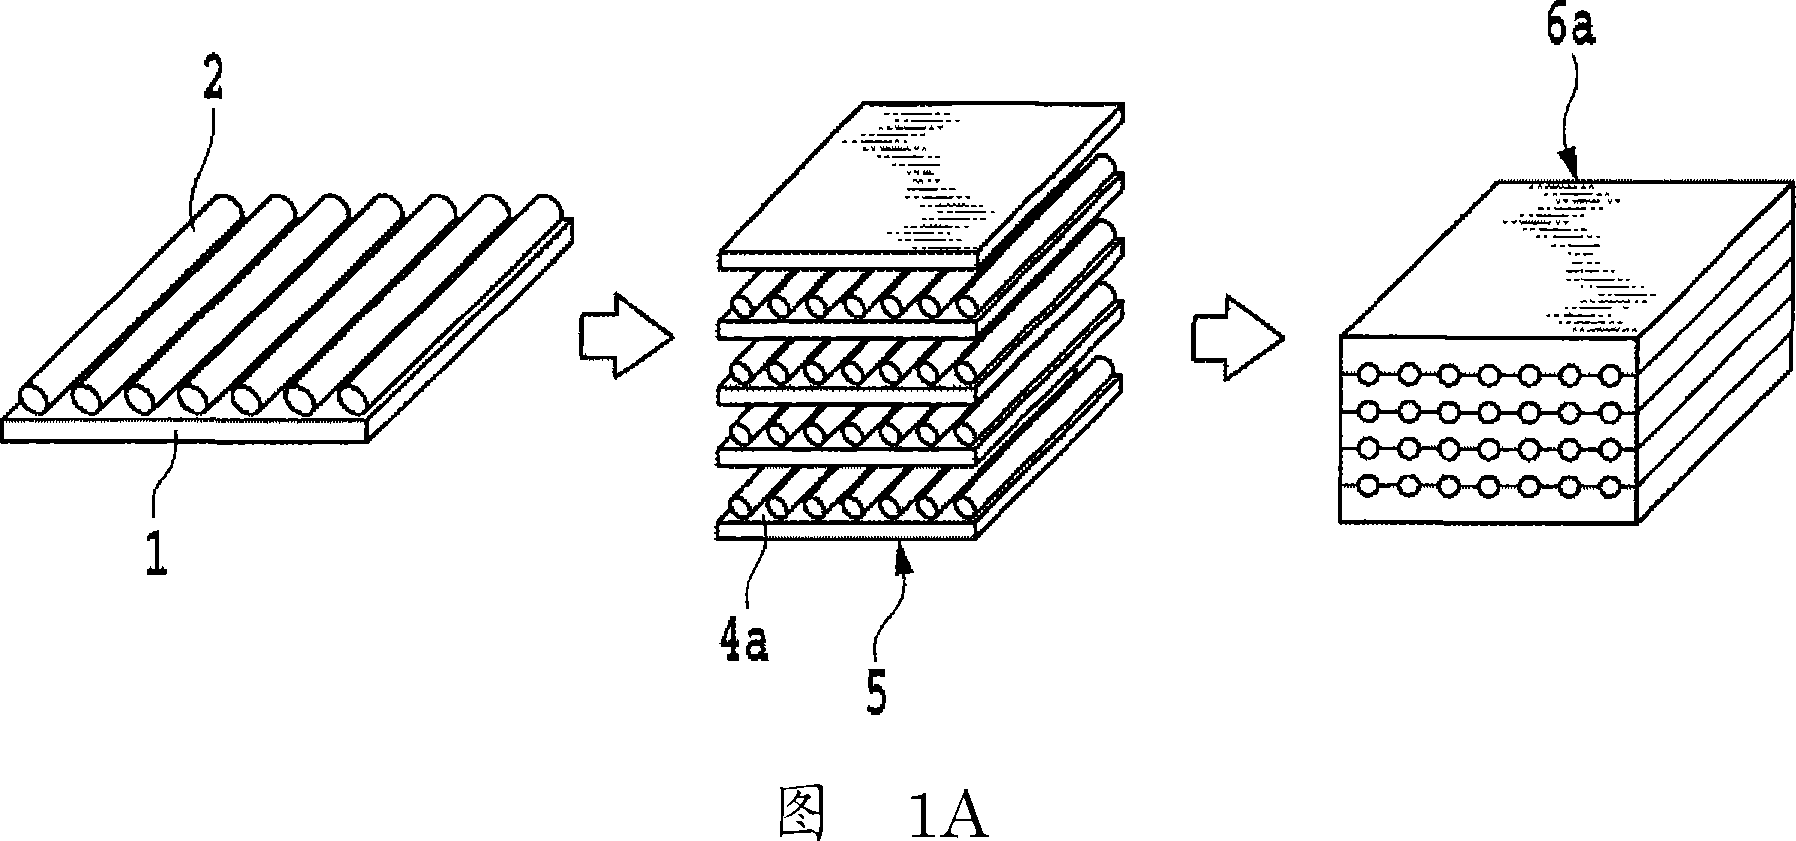 Metal-based carbon fiber composite material and producing method thereof